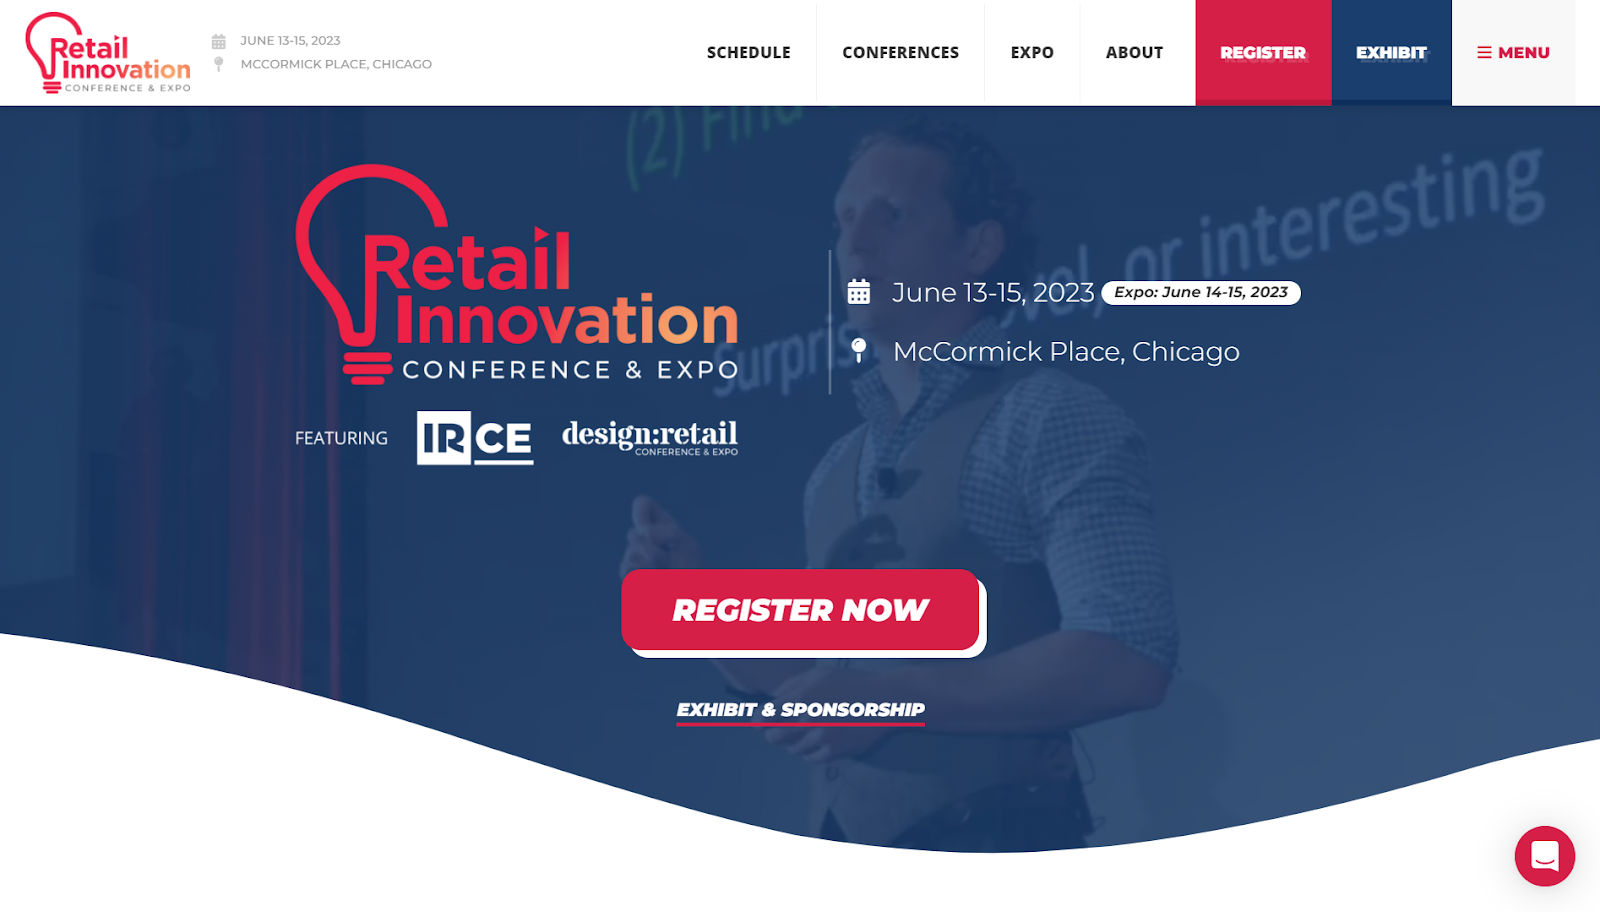 Retail Innovation Conference Expo website promotional banner